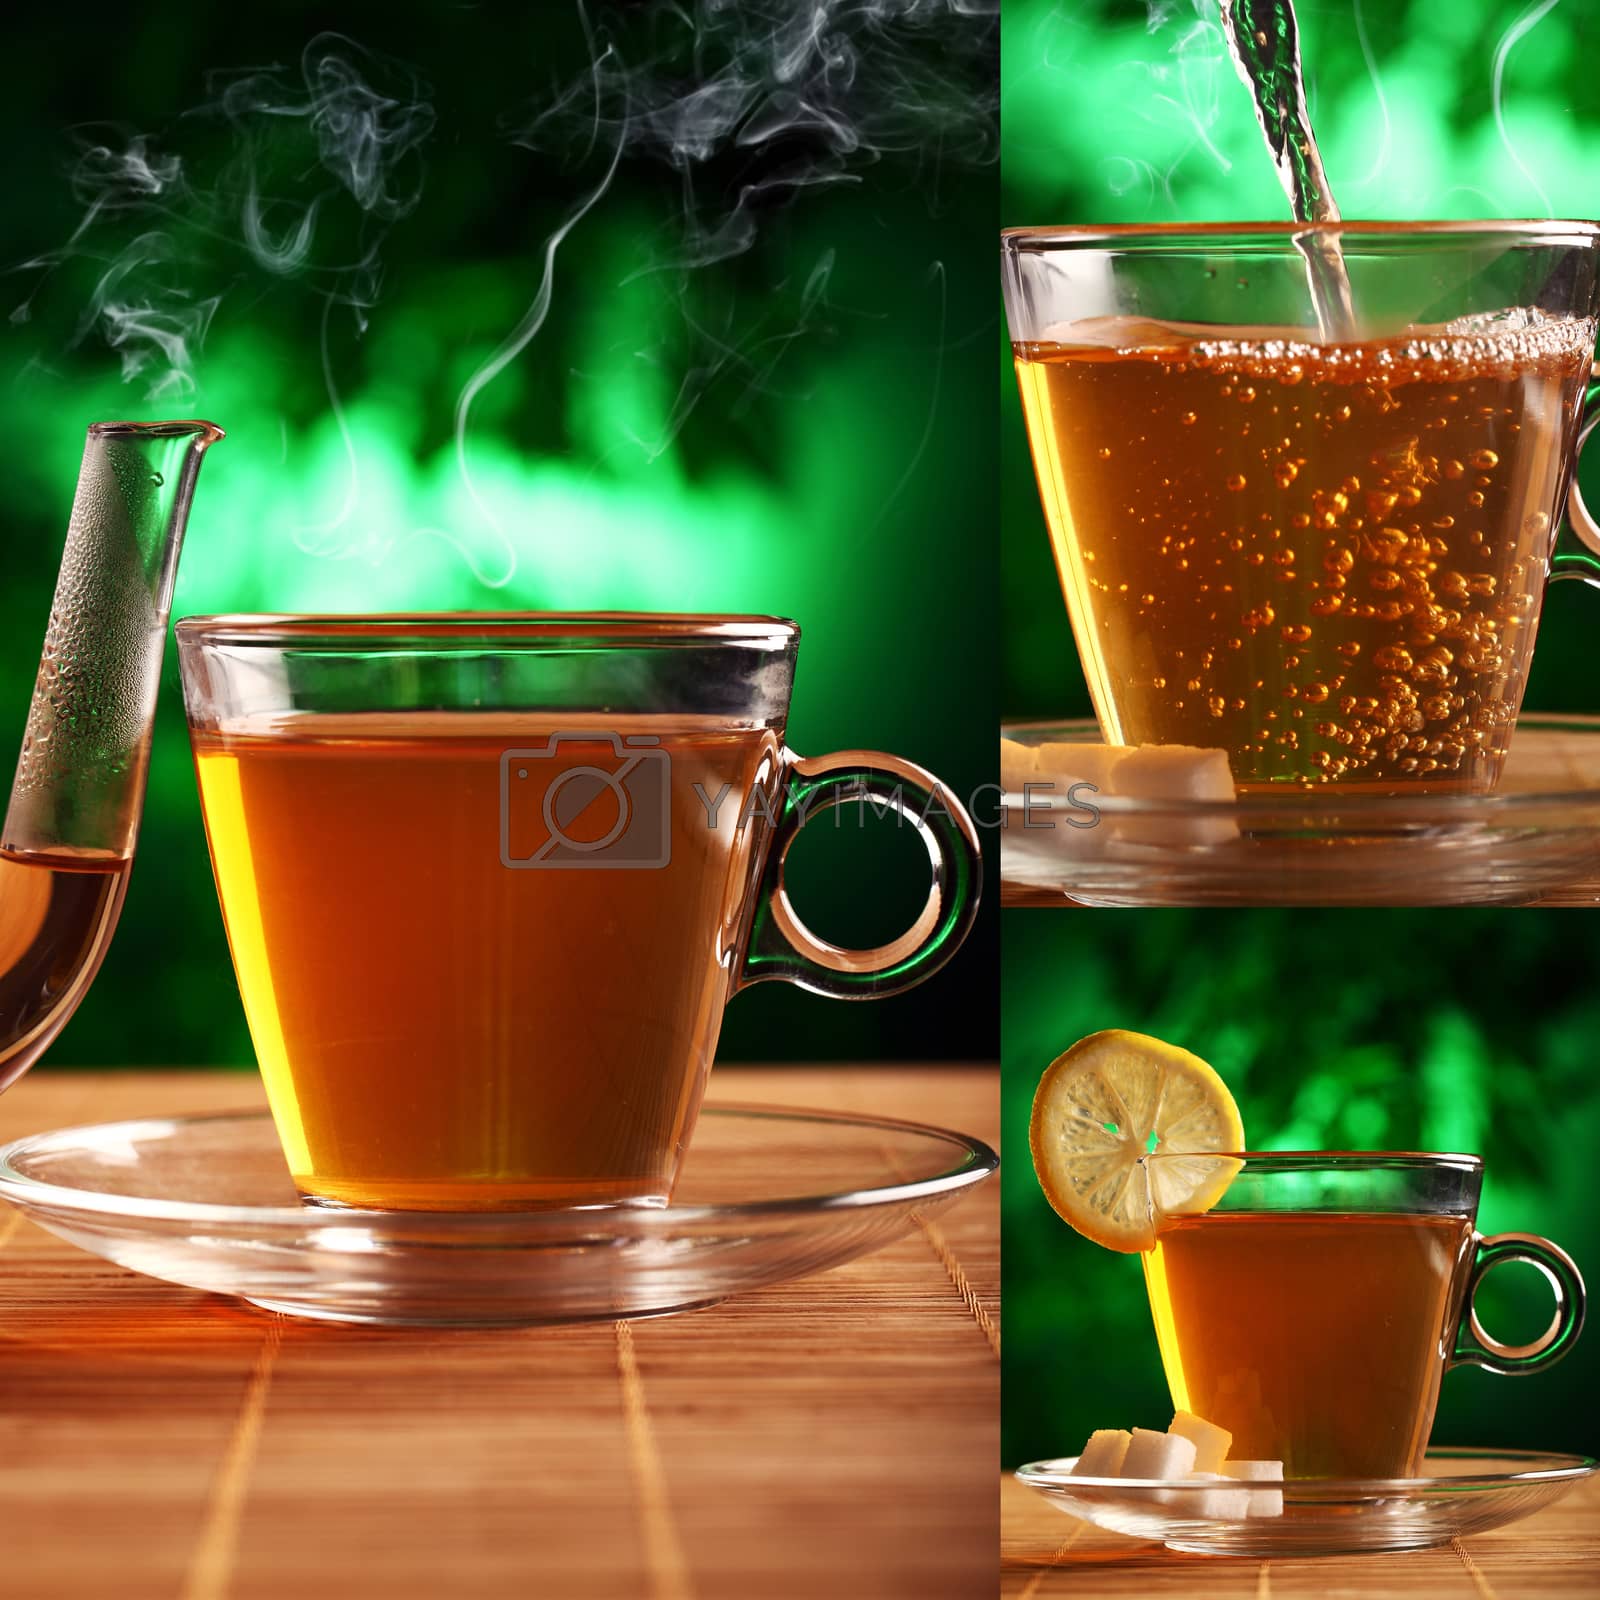 Royalty free image of Cup of tea on a plate with mystical background by rufatjumali